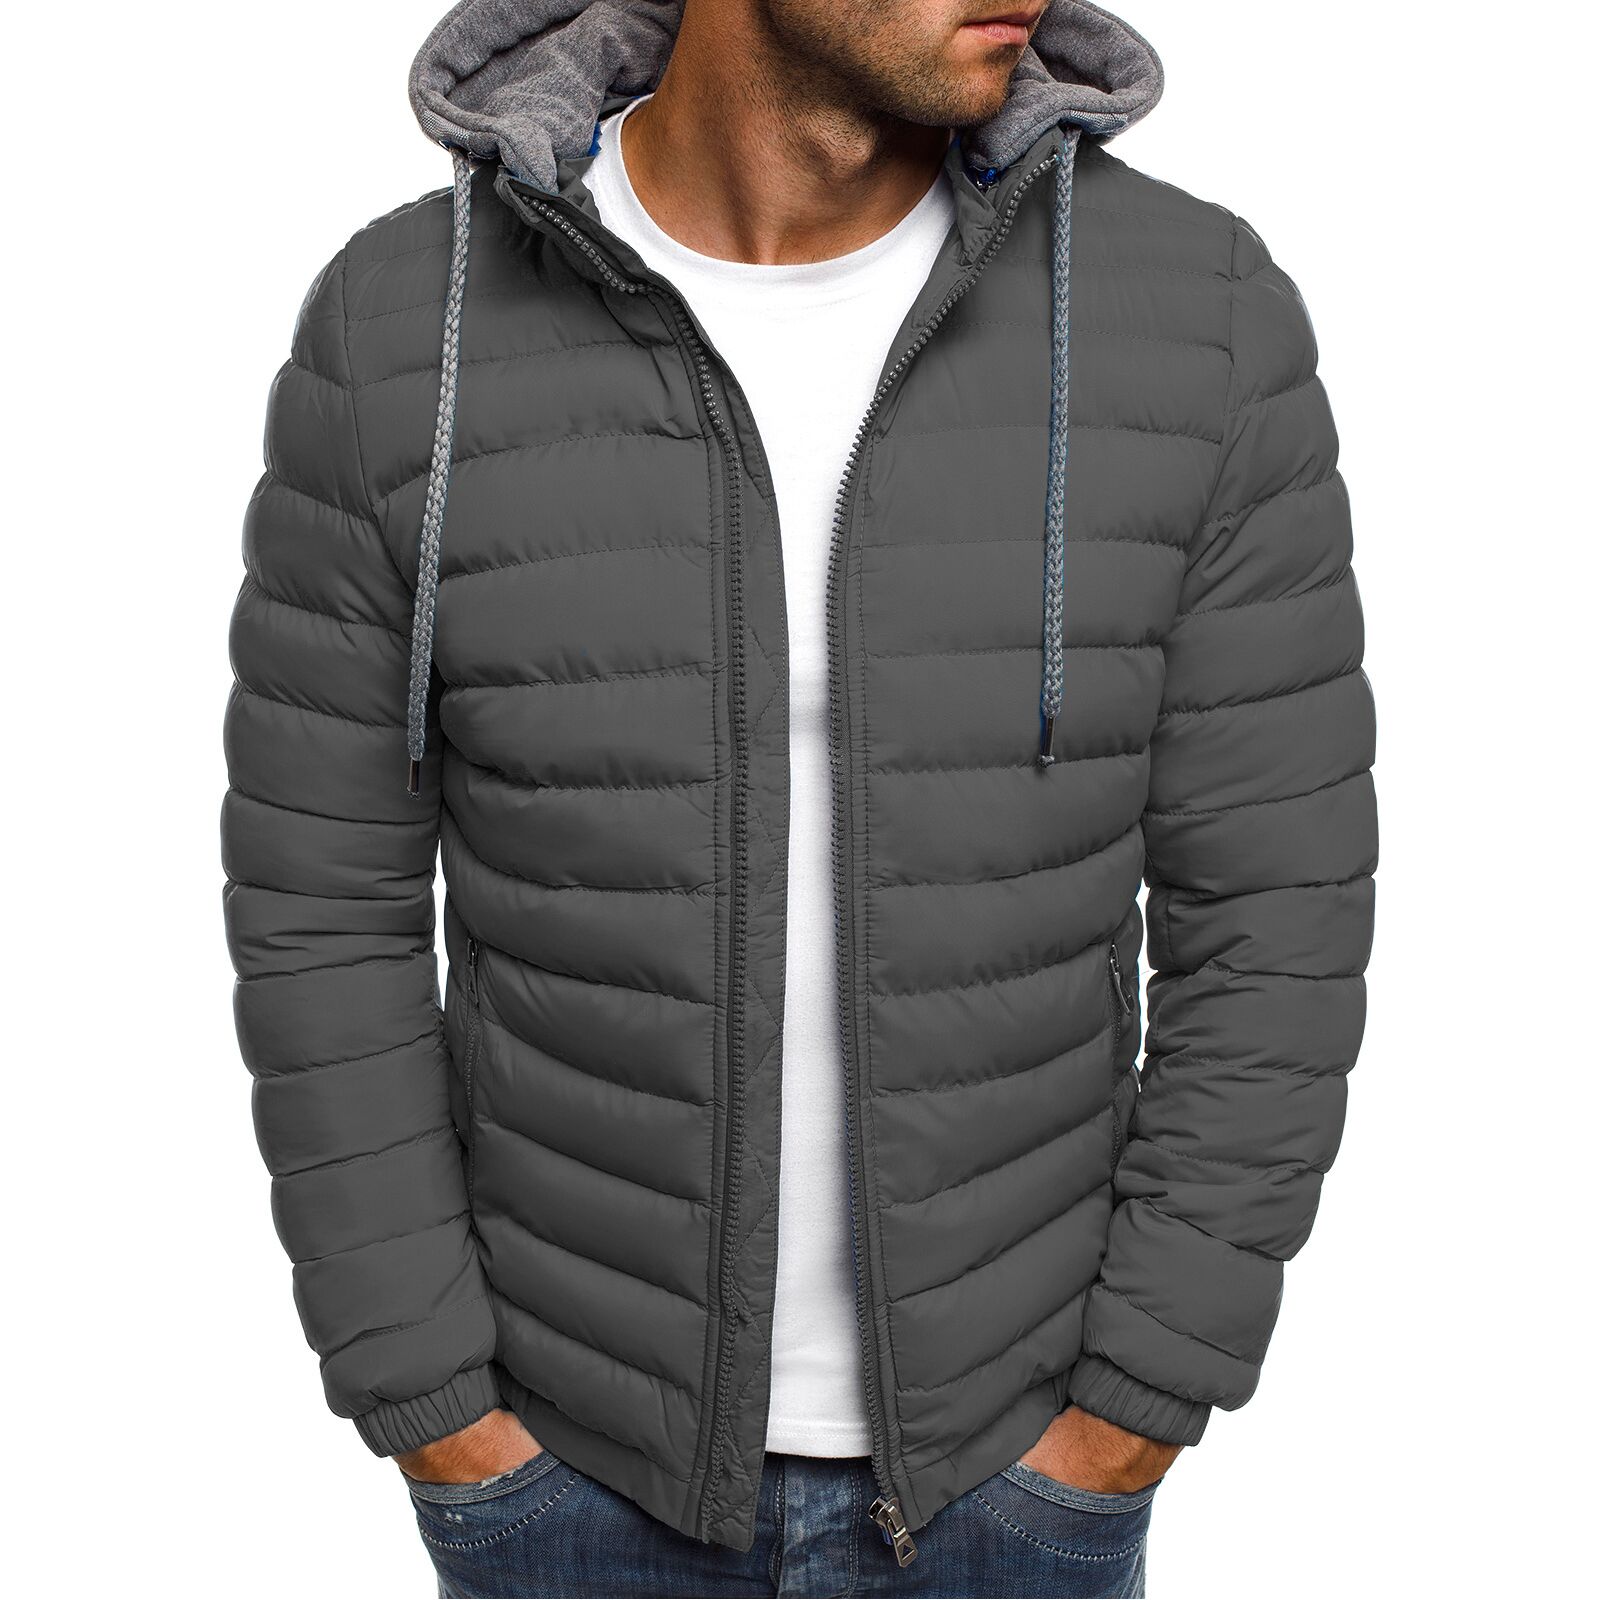 Hooded Down Thermal Jacket with Detachable Hat, Winter Warm Hoodie Outwear Light Quality Packable Zipper Top Coat - image 1 of 6